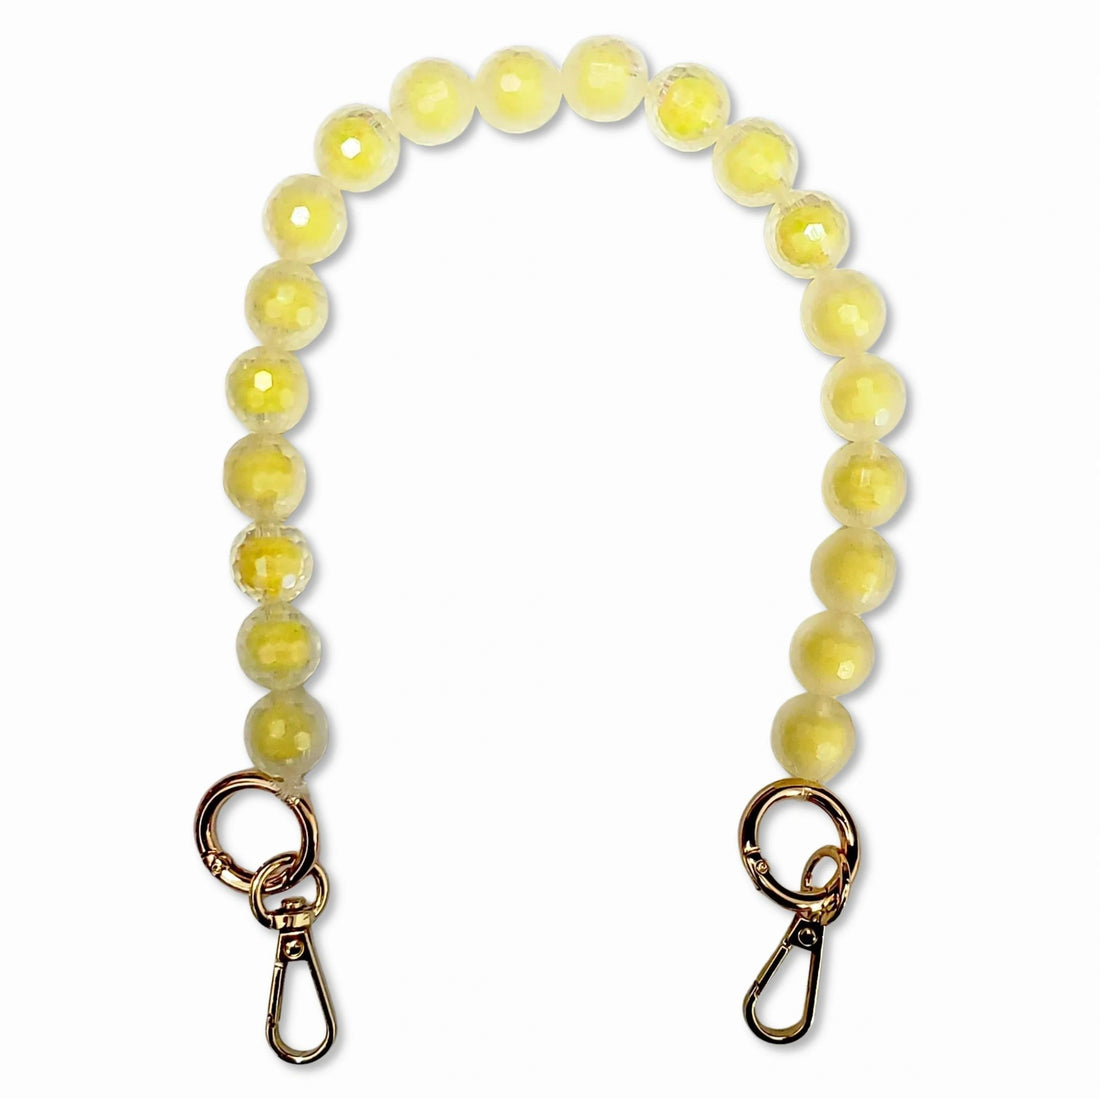 Summer - Holographic Reflection Bead Short Chain with Golden Carabiners